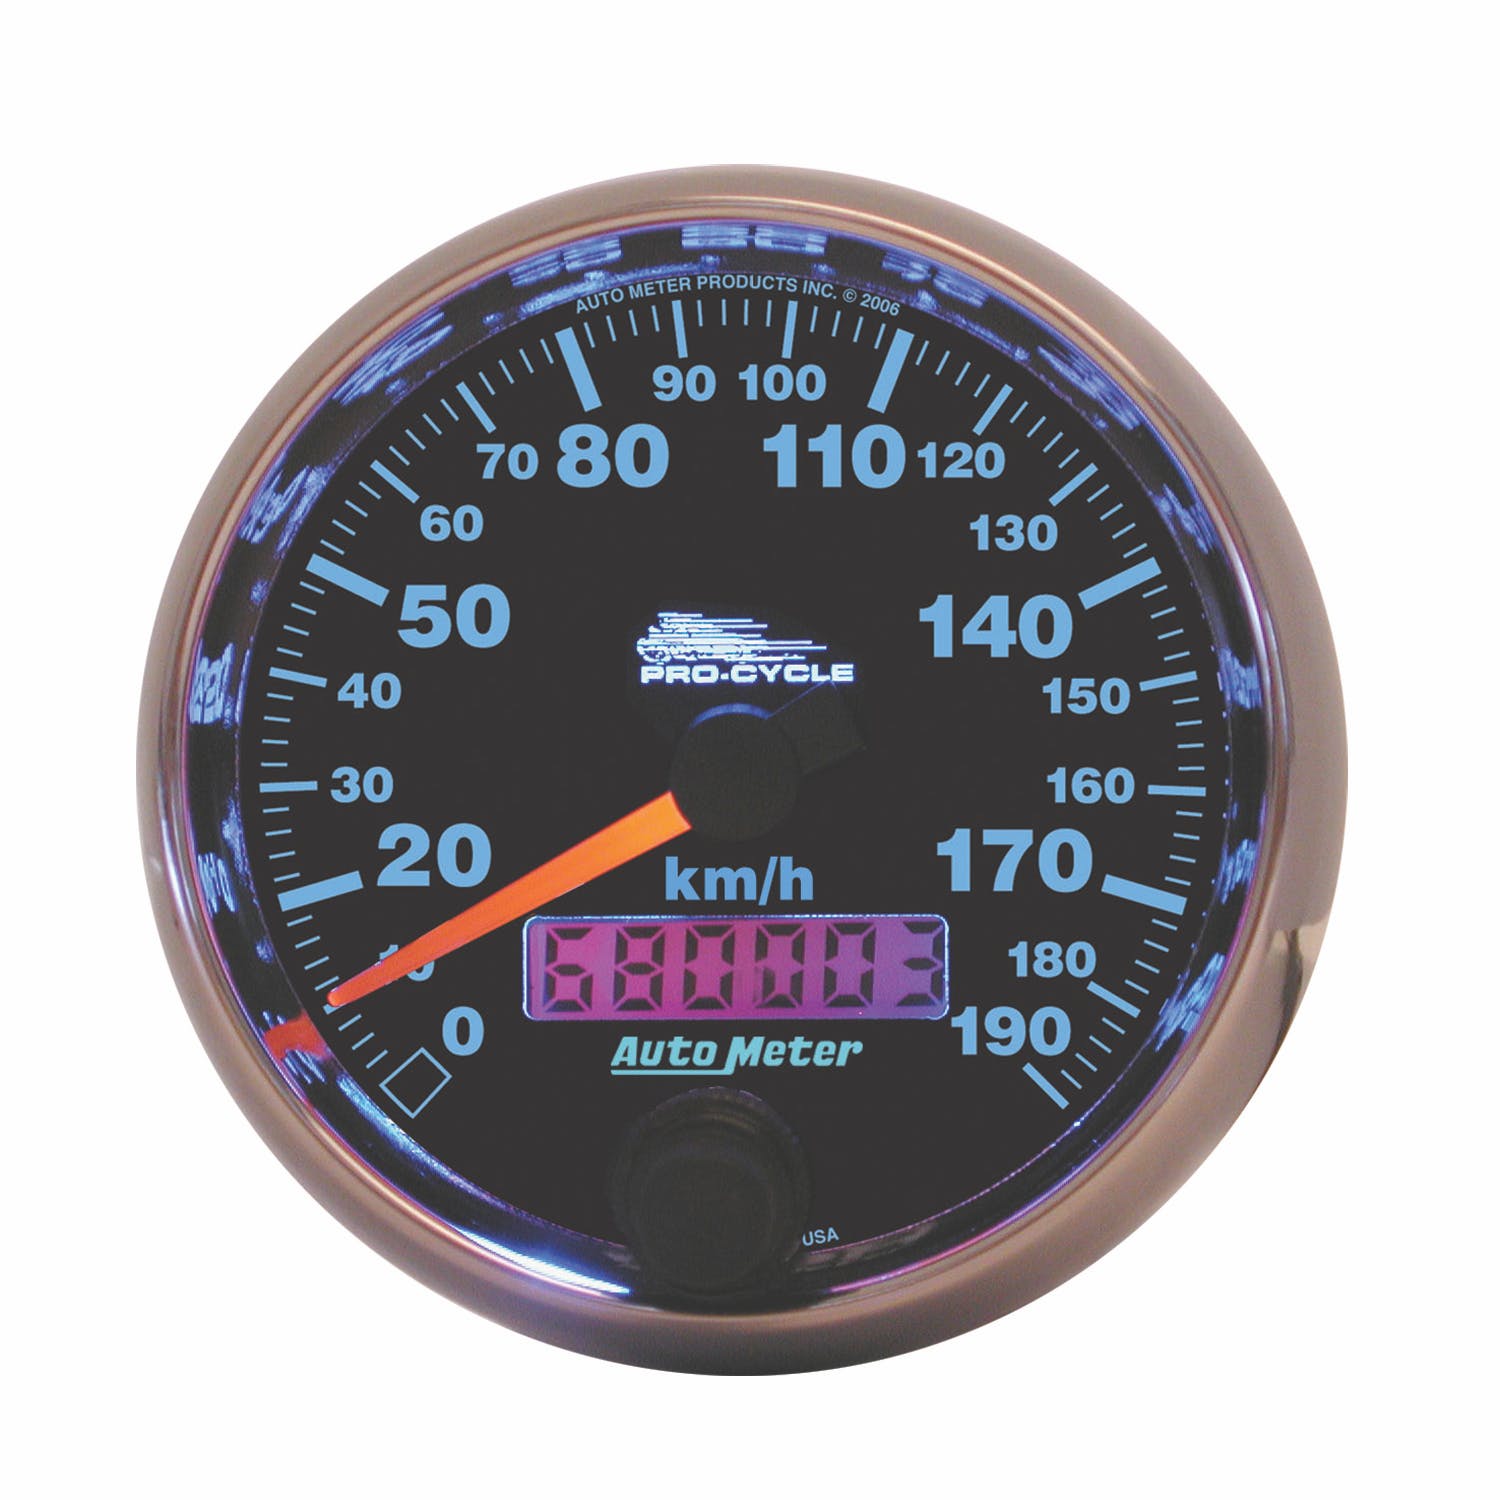 AutoMeter Products 19340-M Speedometer Gauge, Electric Black-Pro Cycle 2 5/8, 190 KMH